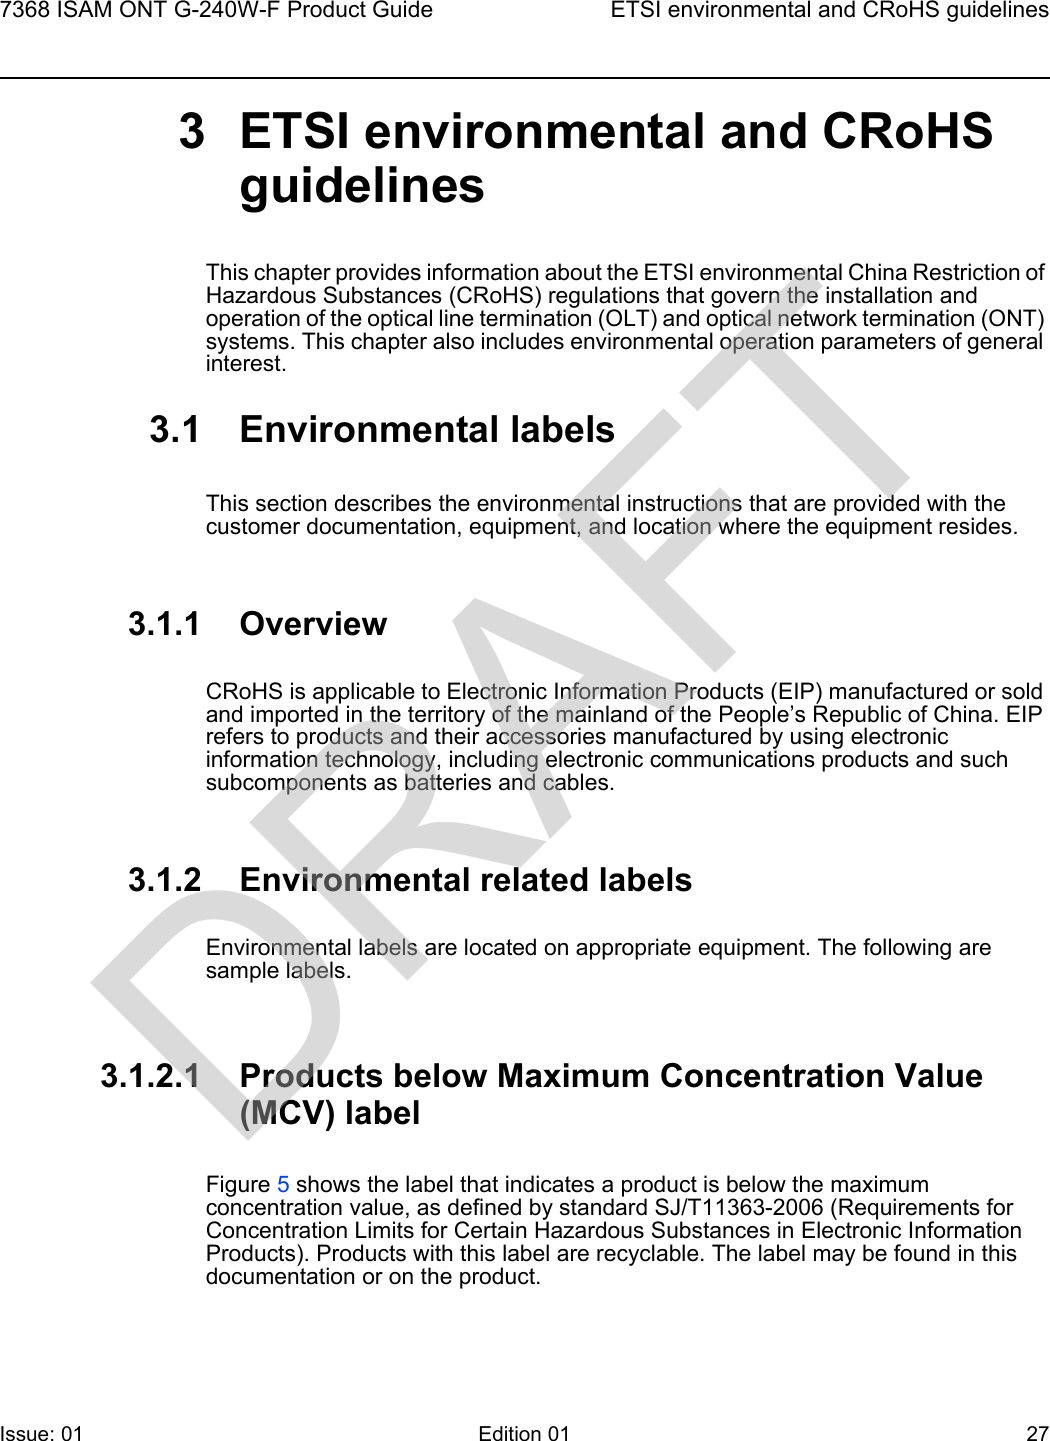 7368 ISAM ONT G-240W-F Product Guide ETSI environmental and CRoHS guidelinesIssue: 01 Edition 01 27 3 ETSI environmental and CRoHS guidelinesThis chapter provides information about the ETSI environmental China Restriction of Hazardous Substances (CRoHS) regulations that govern the installation and operation of the optical line termination (OLT) and optical network termination (ONT) systems. This chapter also includes environmental operation parameters of general interest.3.1 Environmental labelsThis section describes the environmental instructions that are provided with the customer documentation, equipment, and location where the equipment resides.3.1.1 OverviewCRoHS is applicable to Electronic Information Products (EIP) manufactured or sold and imported in the territory of the mainland of the People’s Republic of China. EIP refers to products and their accessories manufactured by using electronic information technology, including electronic communications products and such subcomponents as batteries and cables.3.1.2 Environmental related labelsEnvironmental labels are located on appropriate equipment. The following are sample labels.3.1.2.1 Products below Maximum Concentration Value (MCV) labelFigure 5 shows the label that indicates a product is below the maximum concentration value, as defined by standard SJ/T11363-2006 (Requirements for Concentration Limits for Certain Hazardous Substances in Electronic Information Products). Products with this label are recyclable. The label may be found in this documentation or on the product.DRAFT